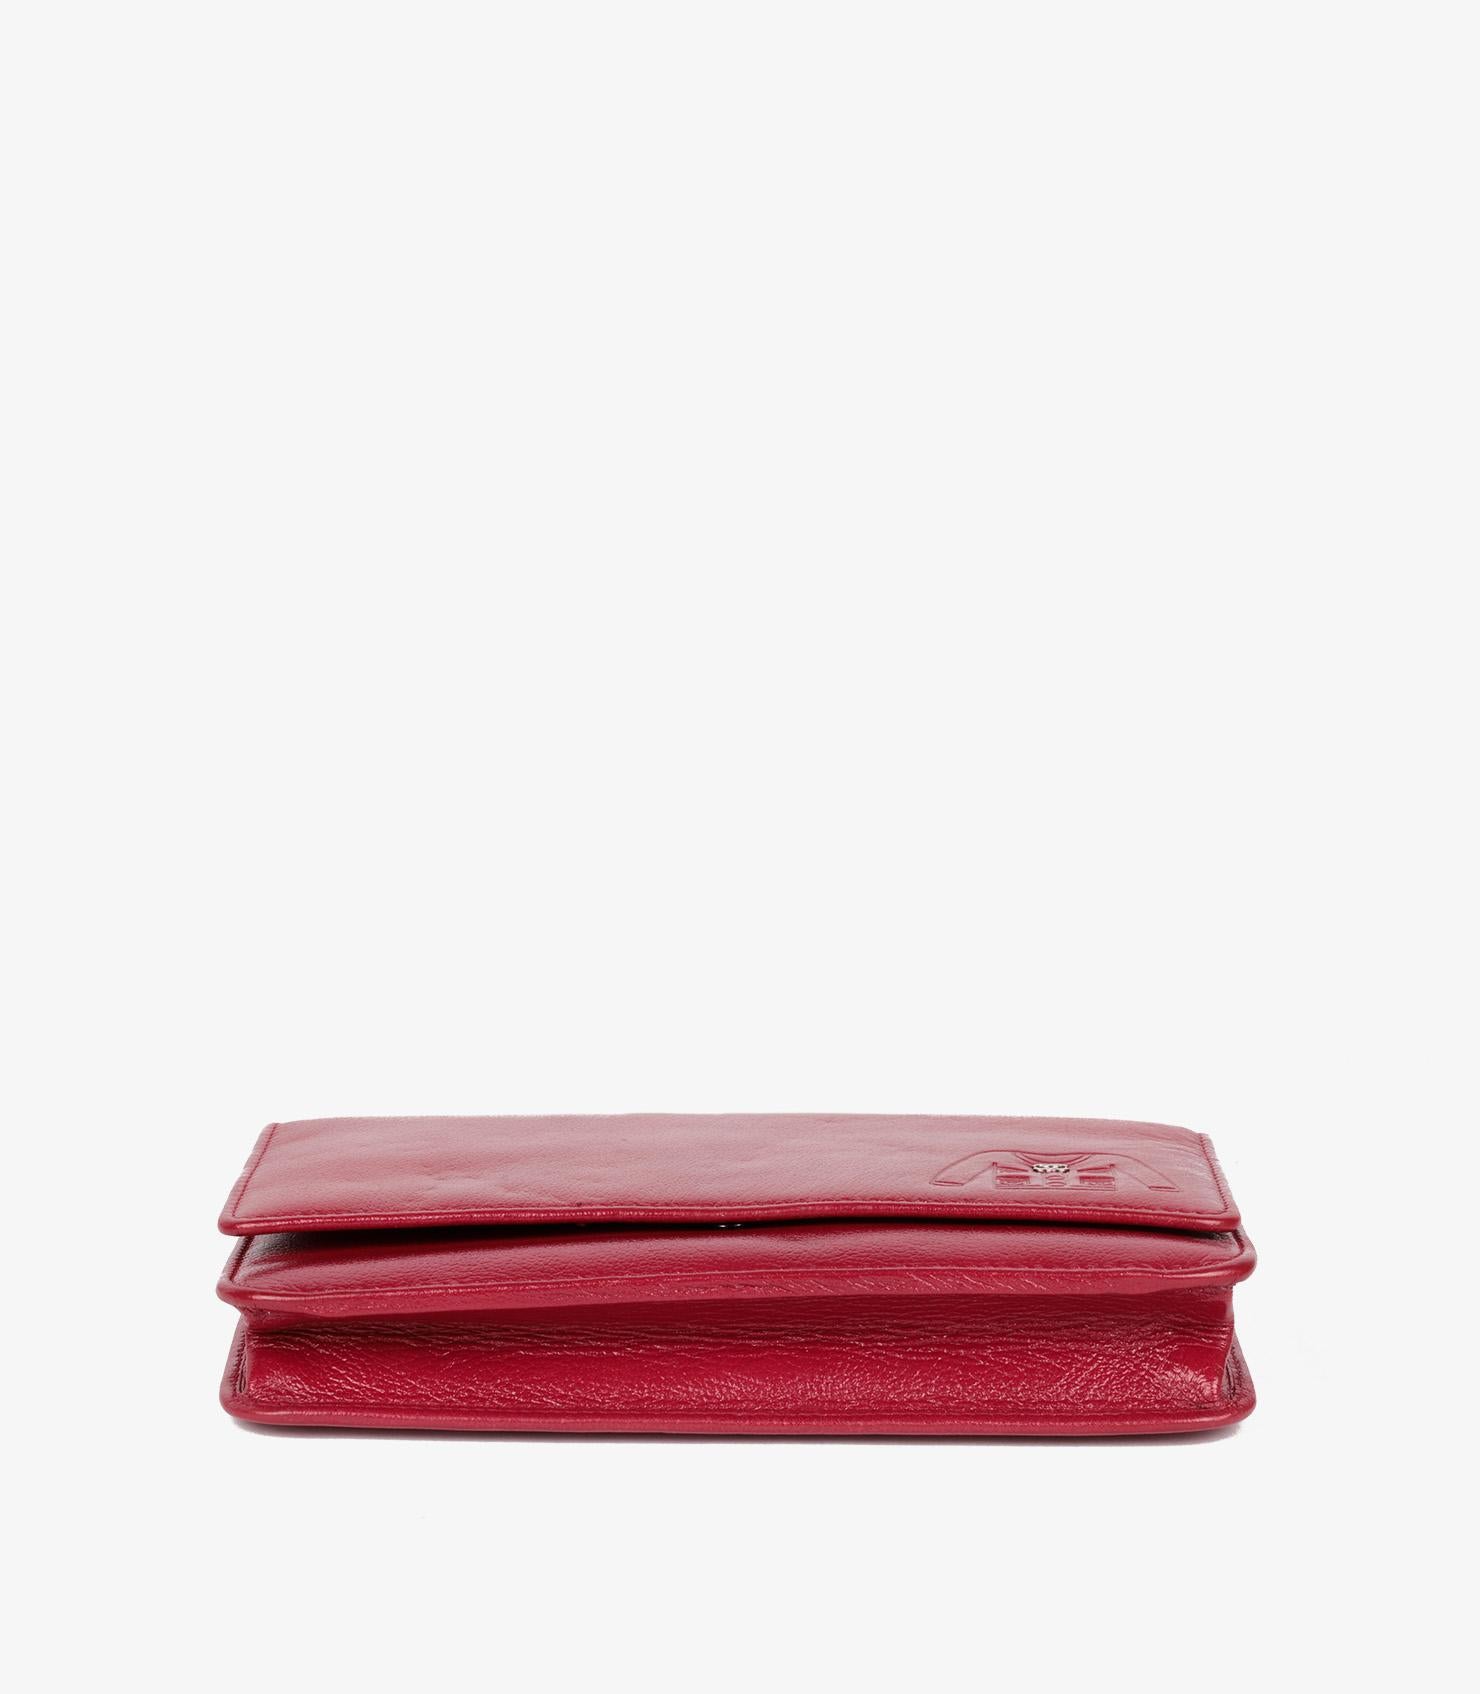 Chanel Red Goatskin Leather Mademoiselle Jacket Embossed Wallet-On-Chain WOC For Sale 3